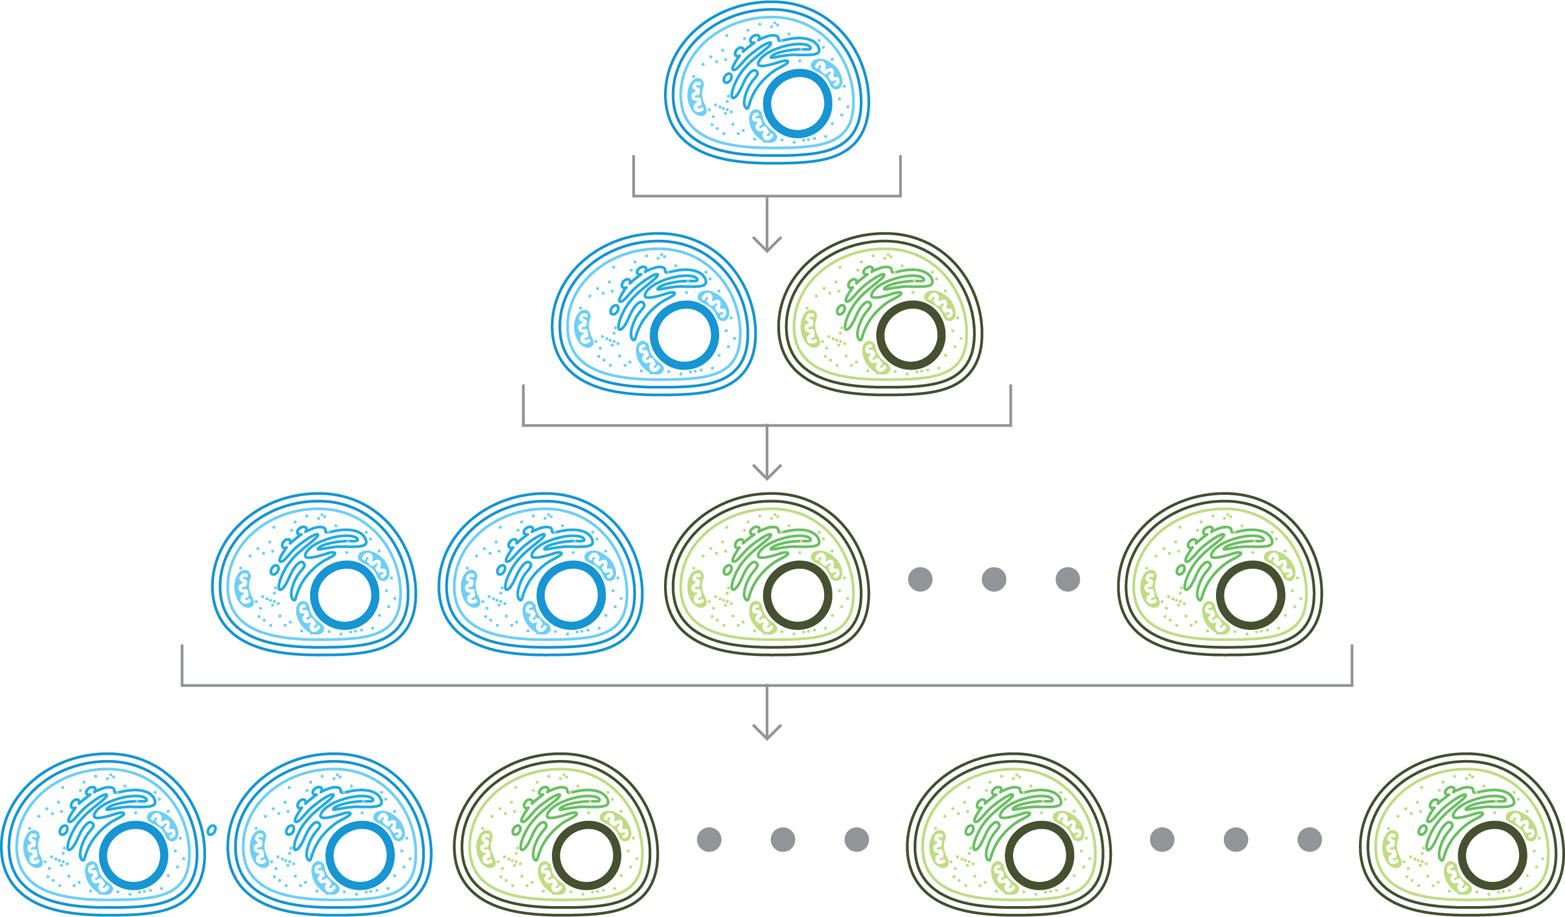 Generational variability. Division of an engineered cell (top, blue) can give rise to an exact copy (second row, blue) or a mutated variant (second row, green) that might not carry out the desired function. If the variant is more robust, it can take over the population after a few rounds of division, as shown in the bottom row.